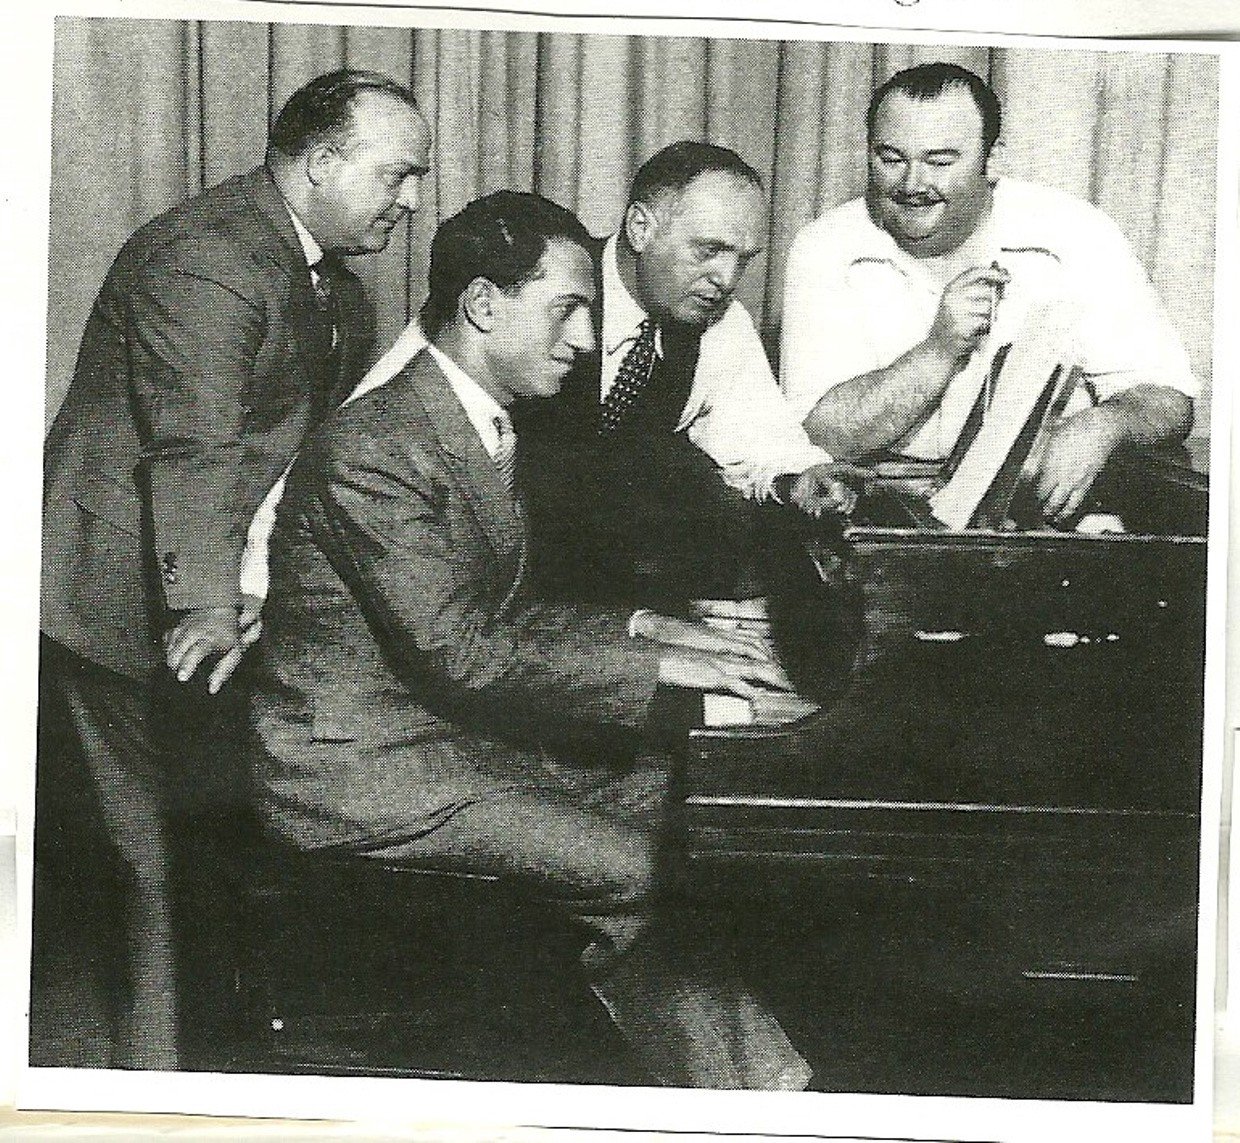 George Gershwin at the piano. Left to right: Ferde Grofé, Samuel “Roxy” Rothafel, and Paul Whiteman